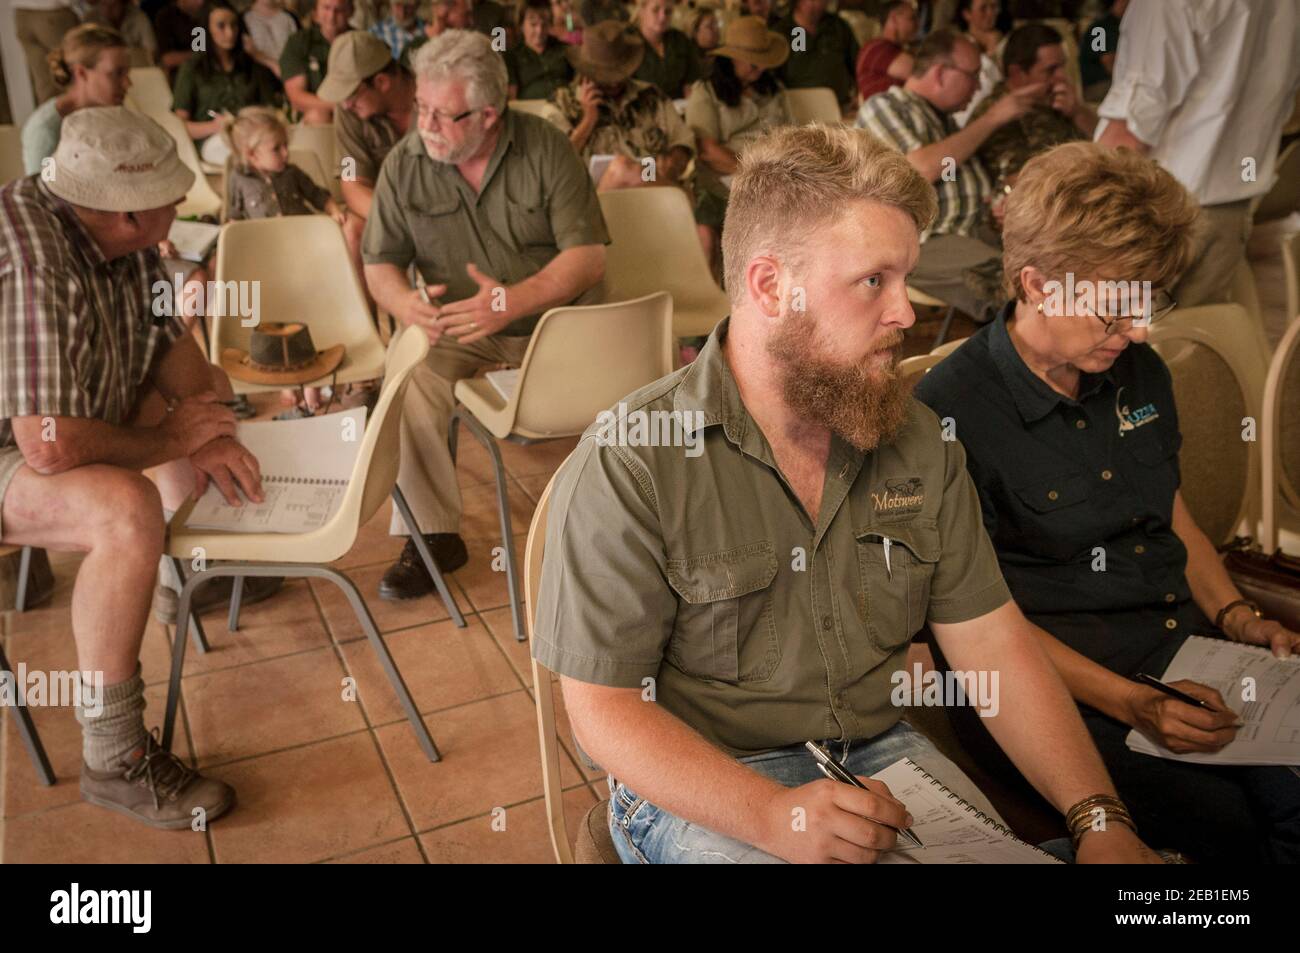 Bidders at a wildlife auction, Mpatamacha wildlife auction venue, near Melkrivier, Limpopo Province, South Africa. 22 October 2016 ©Adam Welz Stock Photo